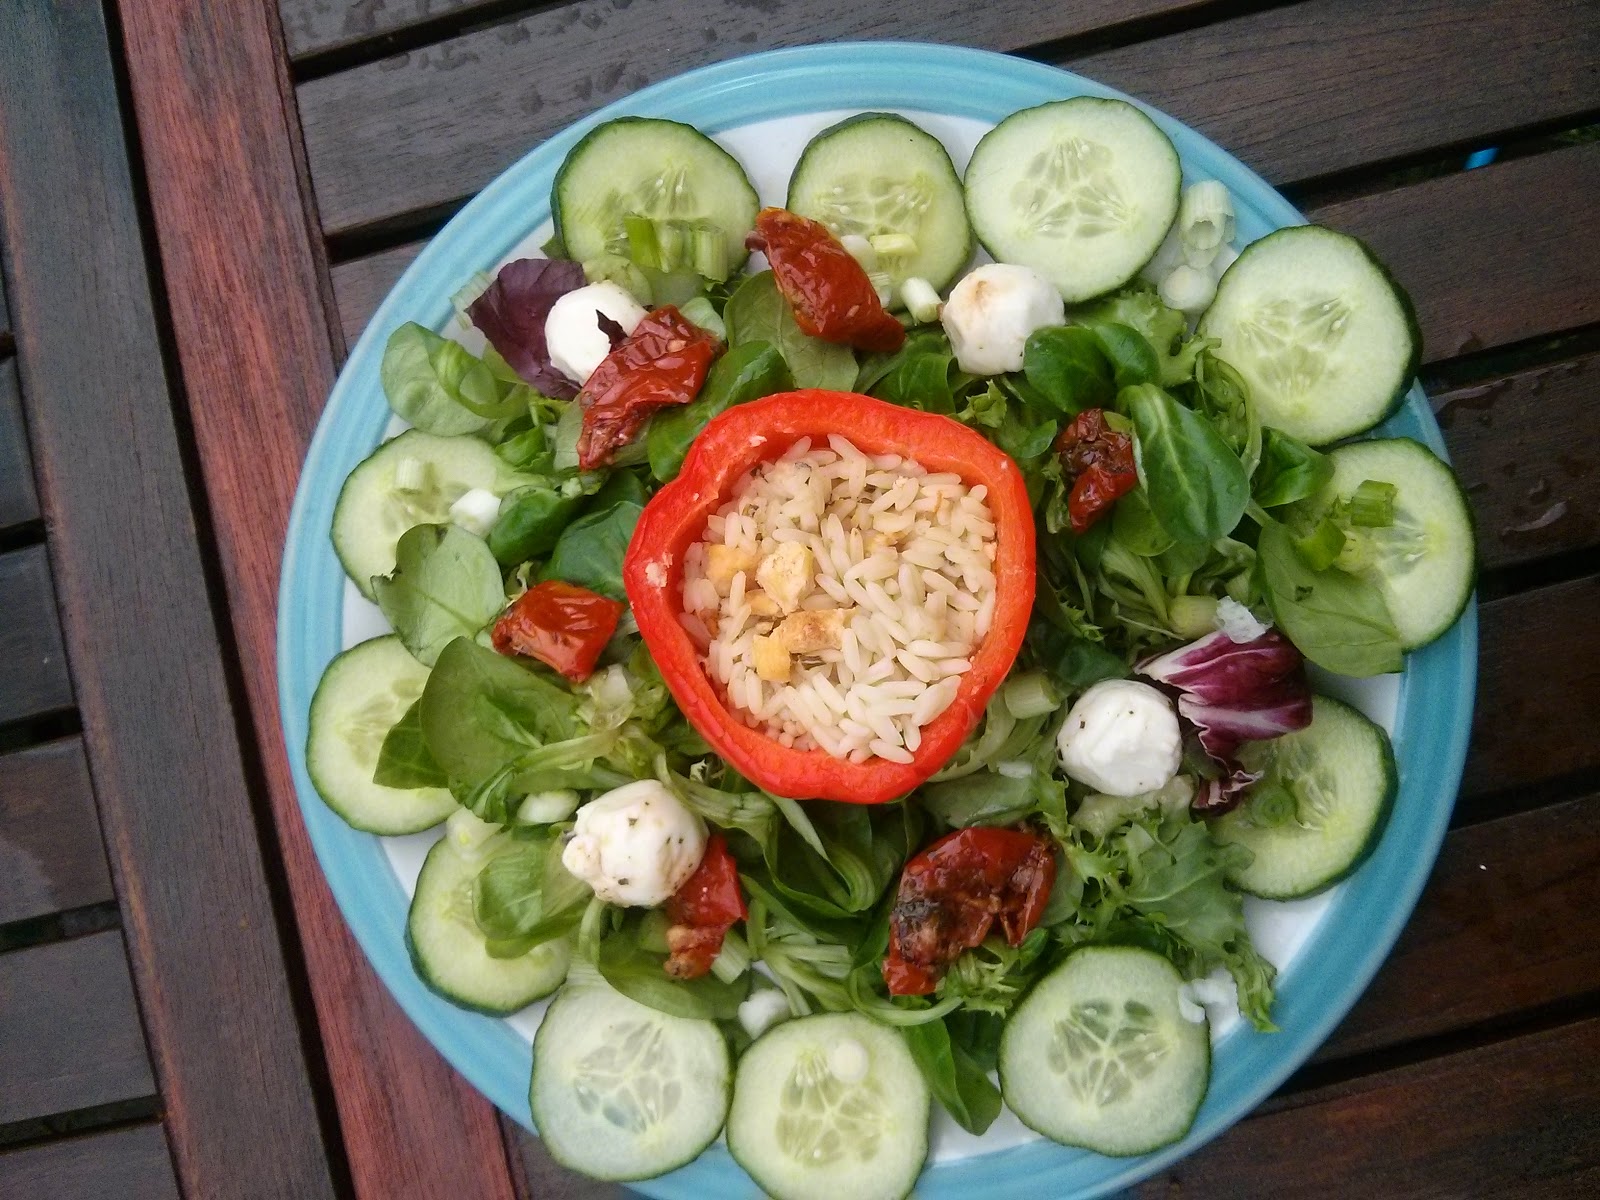 Stuffed Peppers with Salad - Egyptian Style